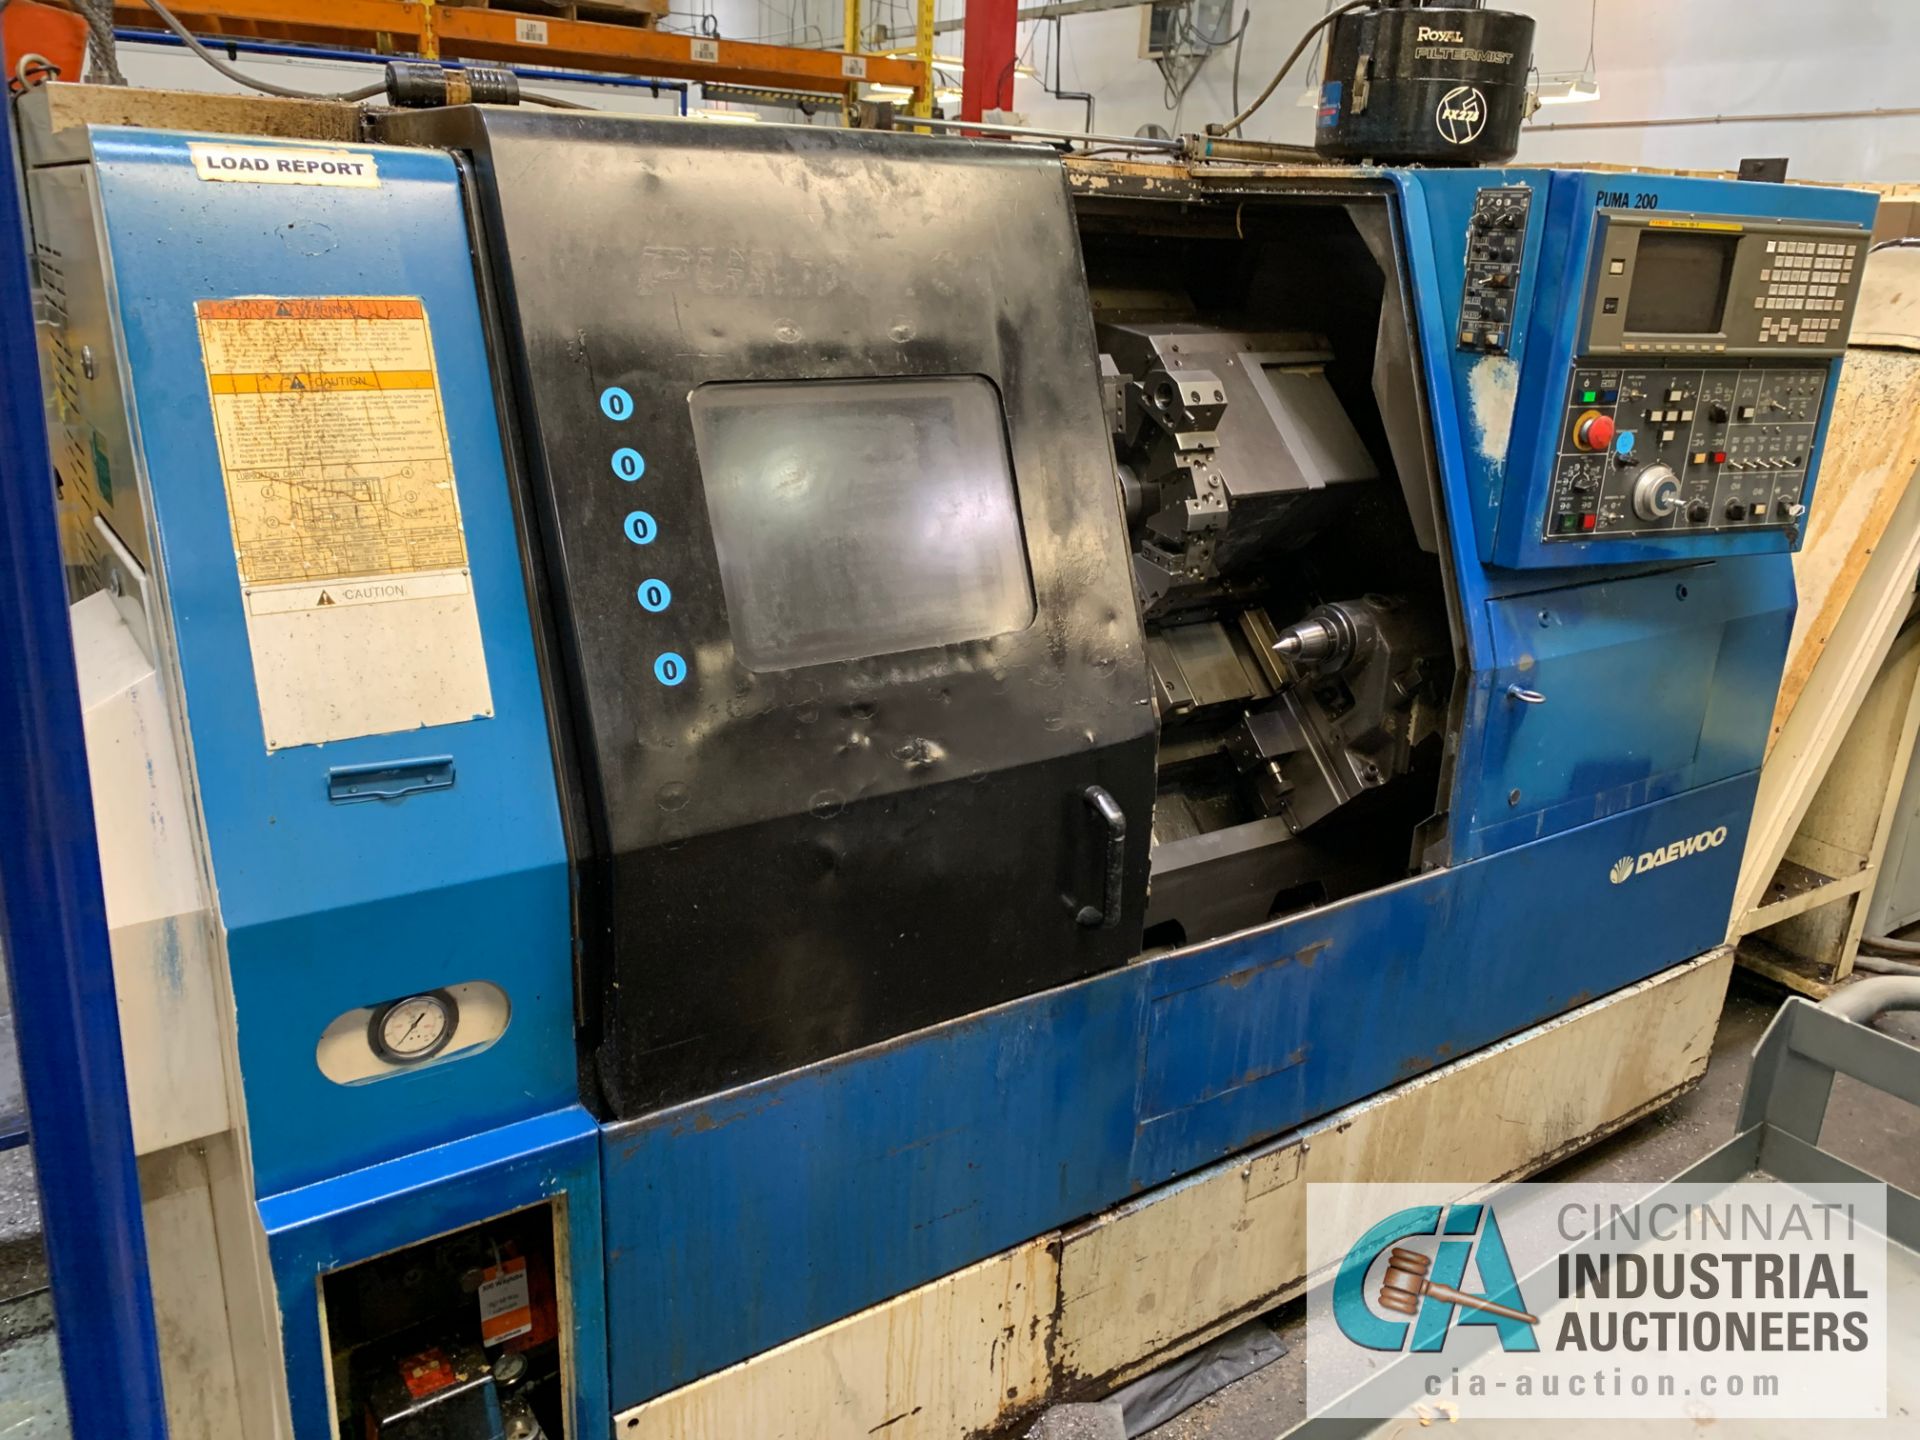 DAEWOO MODEL 200C CNC TURNING CENTER; S/N PM200550, 10" CHUCK, 10-STATION TURRET, TAILSTOCK, TURBO